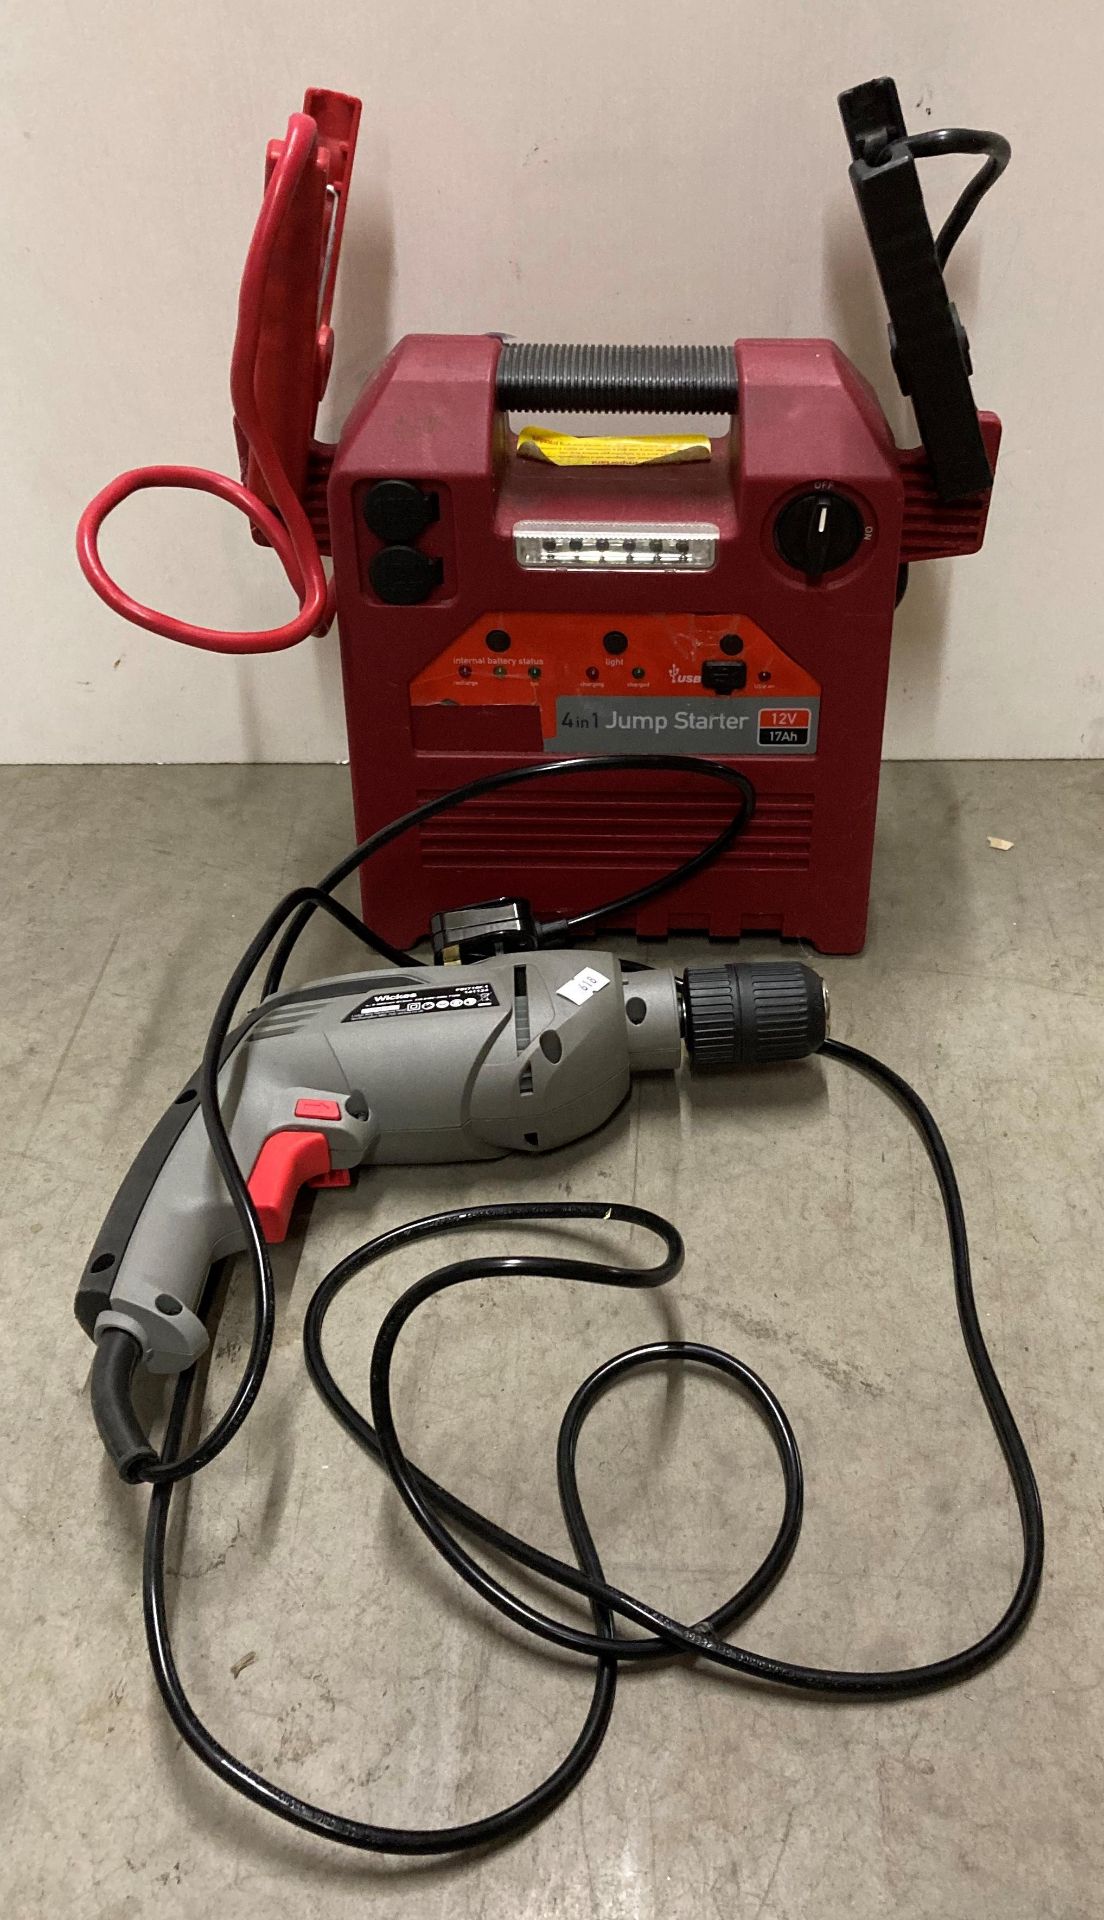 4-in-1 jump starter battery pack and a Wickes hammer-drill (240v) (saleroom location: R05-1)